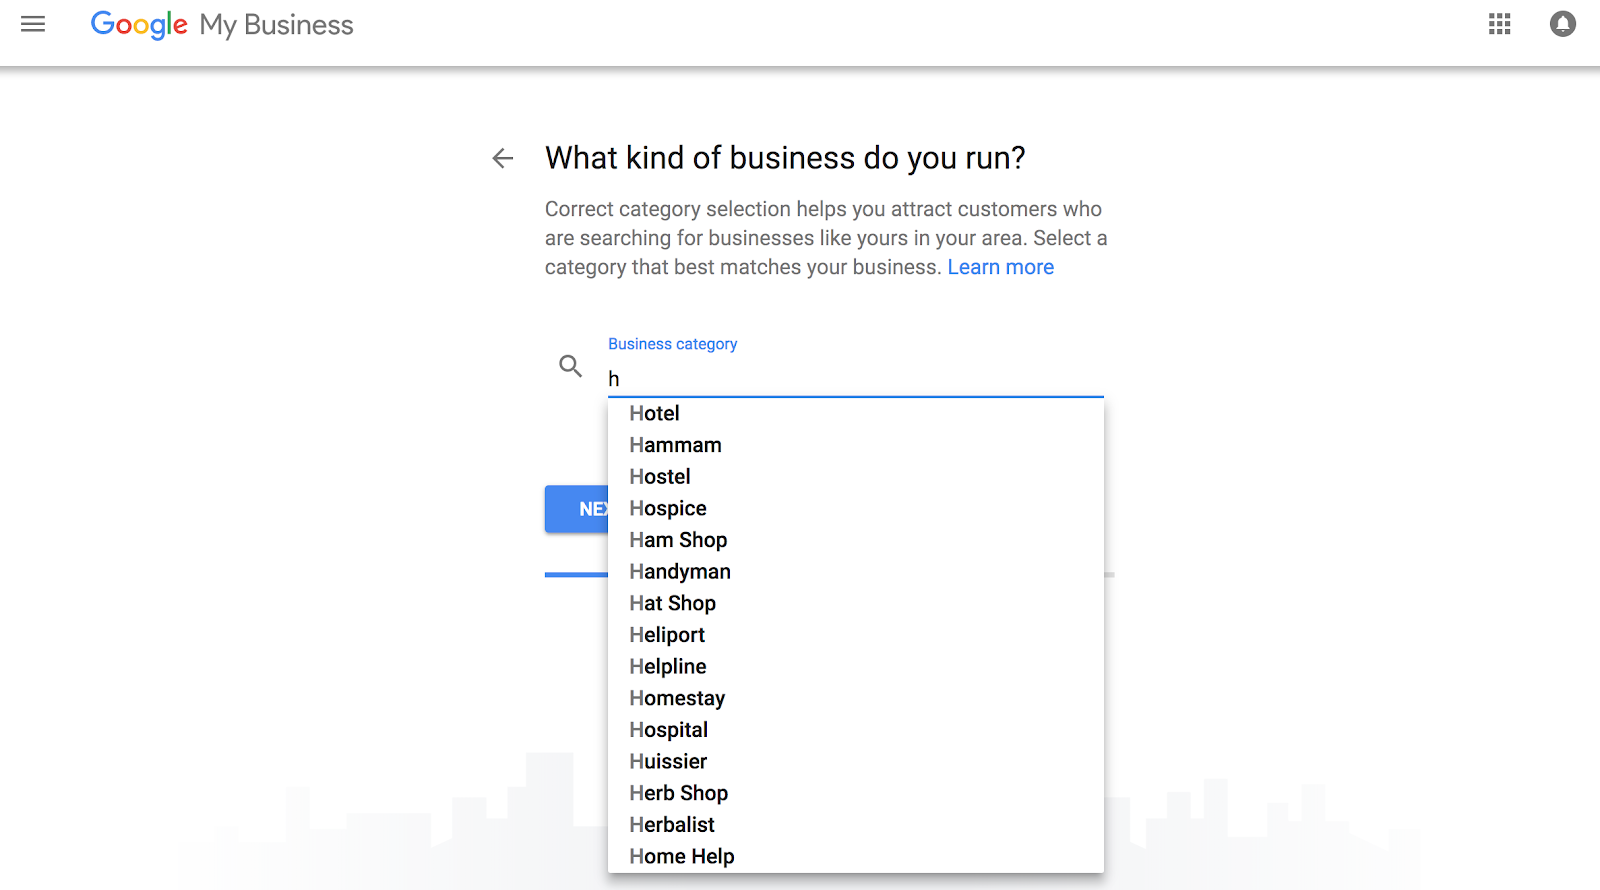 Google My Business - Business Category